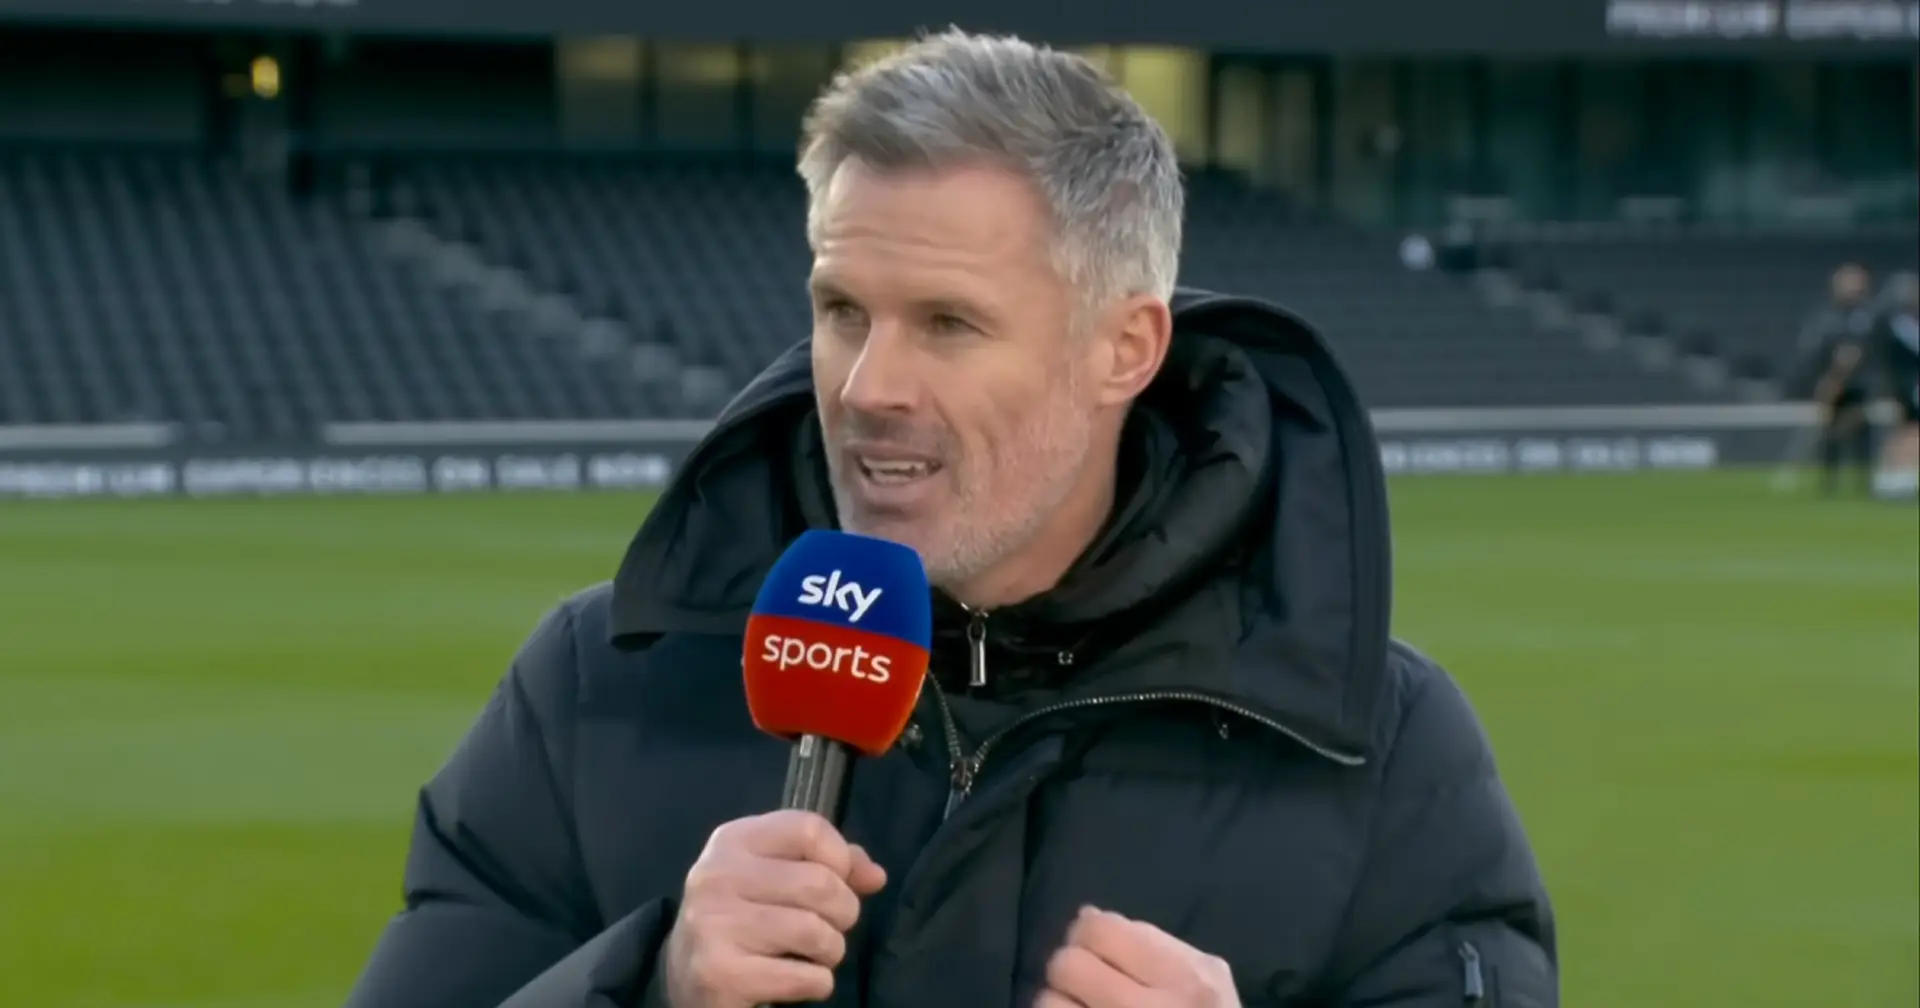 'I just don't see it': Jamie Carragher argues Ten Hag is not the right manager for Man United